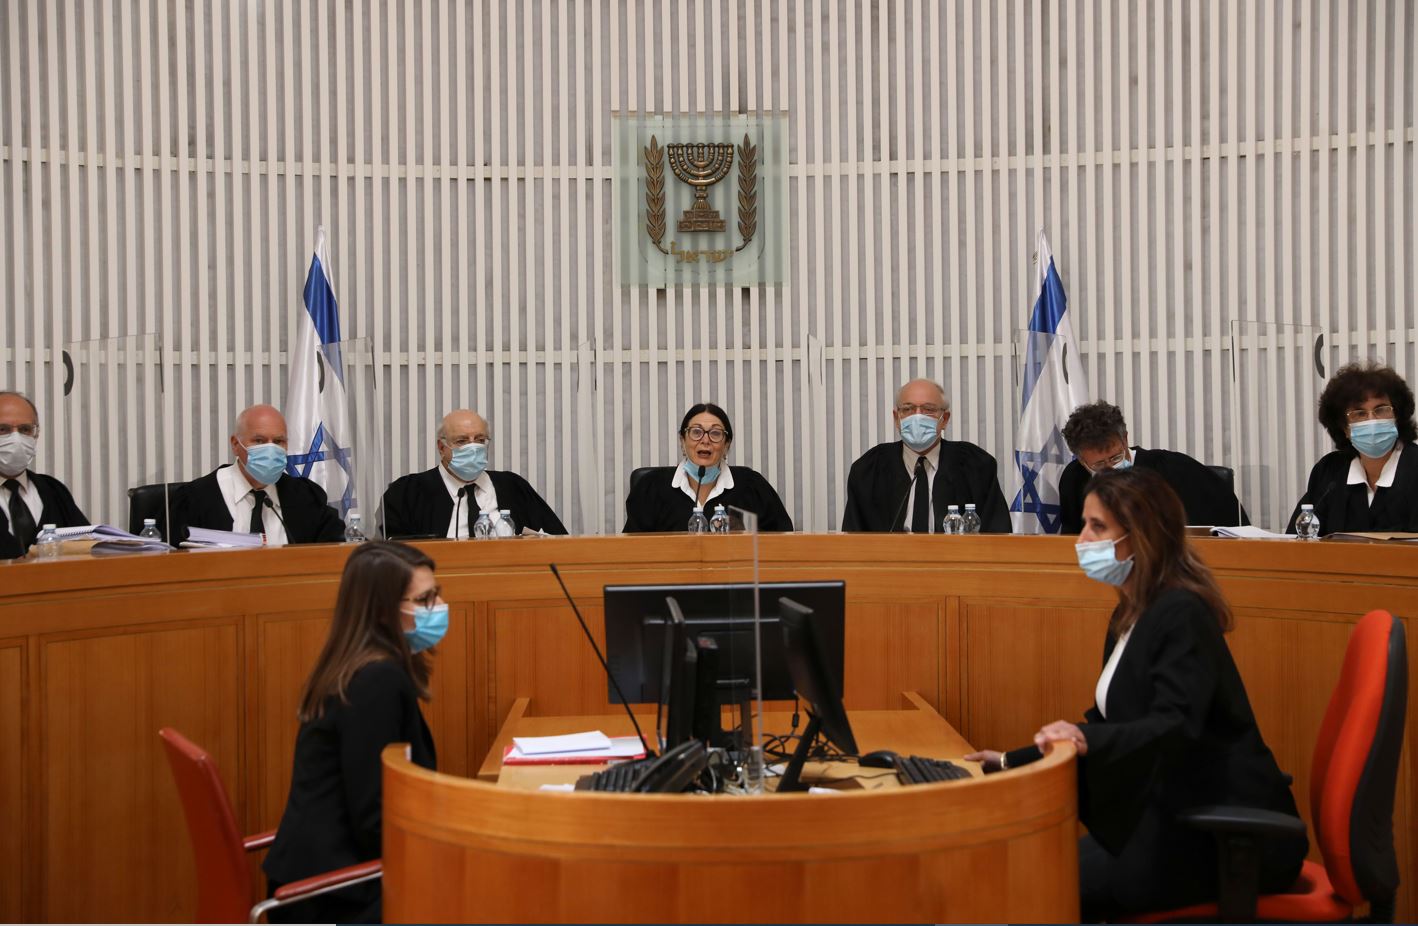 
Judges and personnel of the Israeli Supreme Court attend a session on May 4, 2020. ABIR SULTAN/POOL/AFP via Getty Images.







